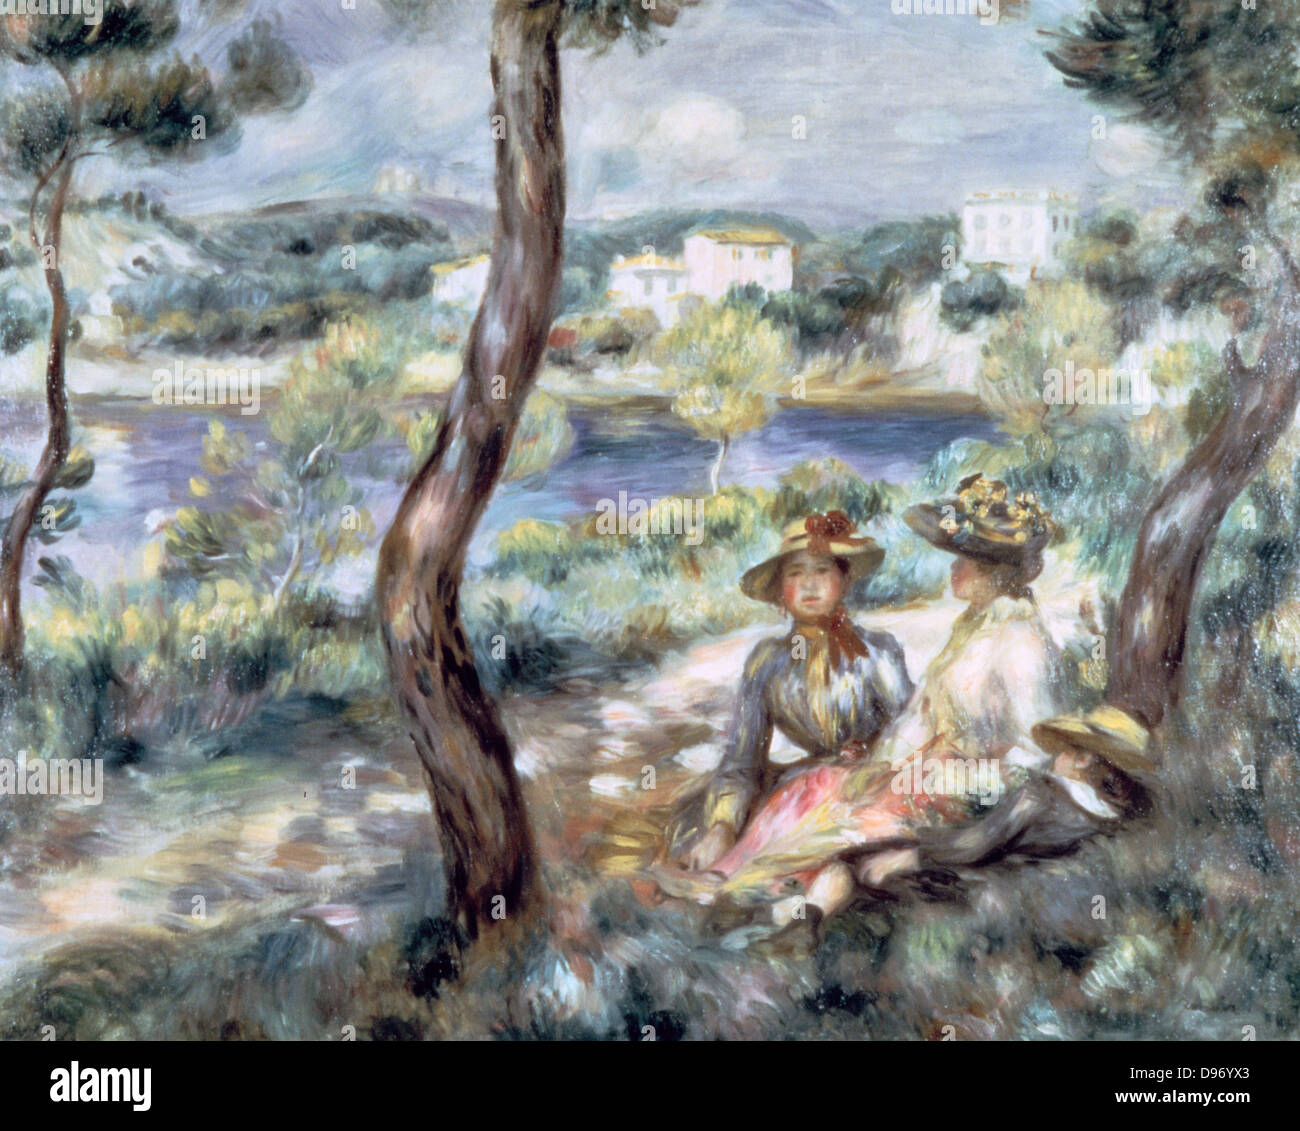 Young Women and a Boy in a Landscape' 1893: Pierre August Renoir 1841-1919) French artist. Oil on canvas. Stock Photo